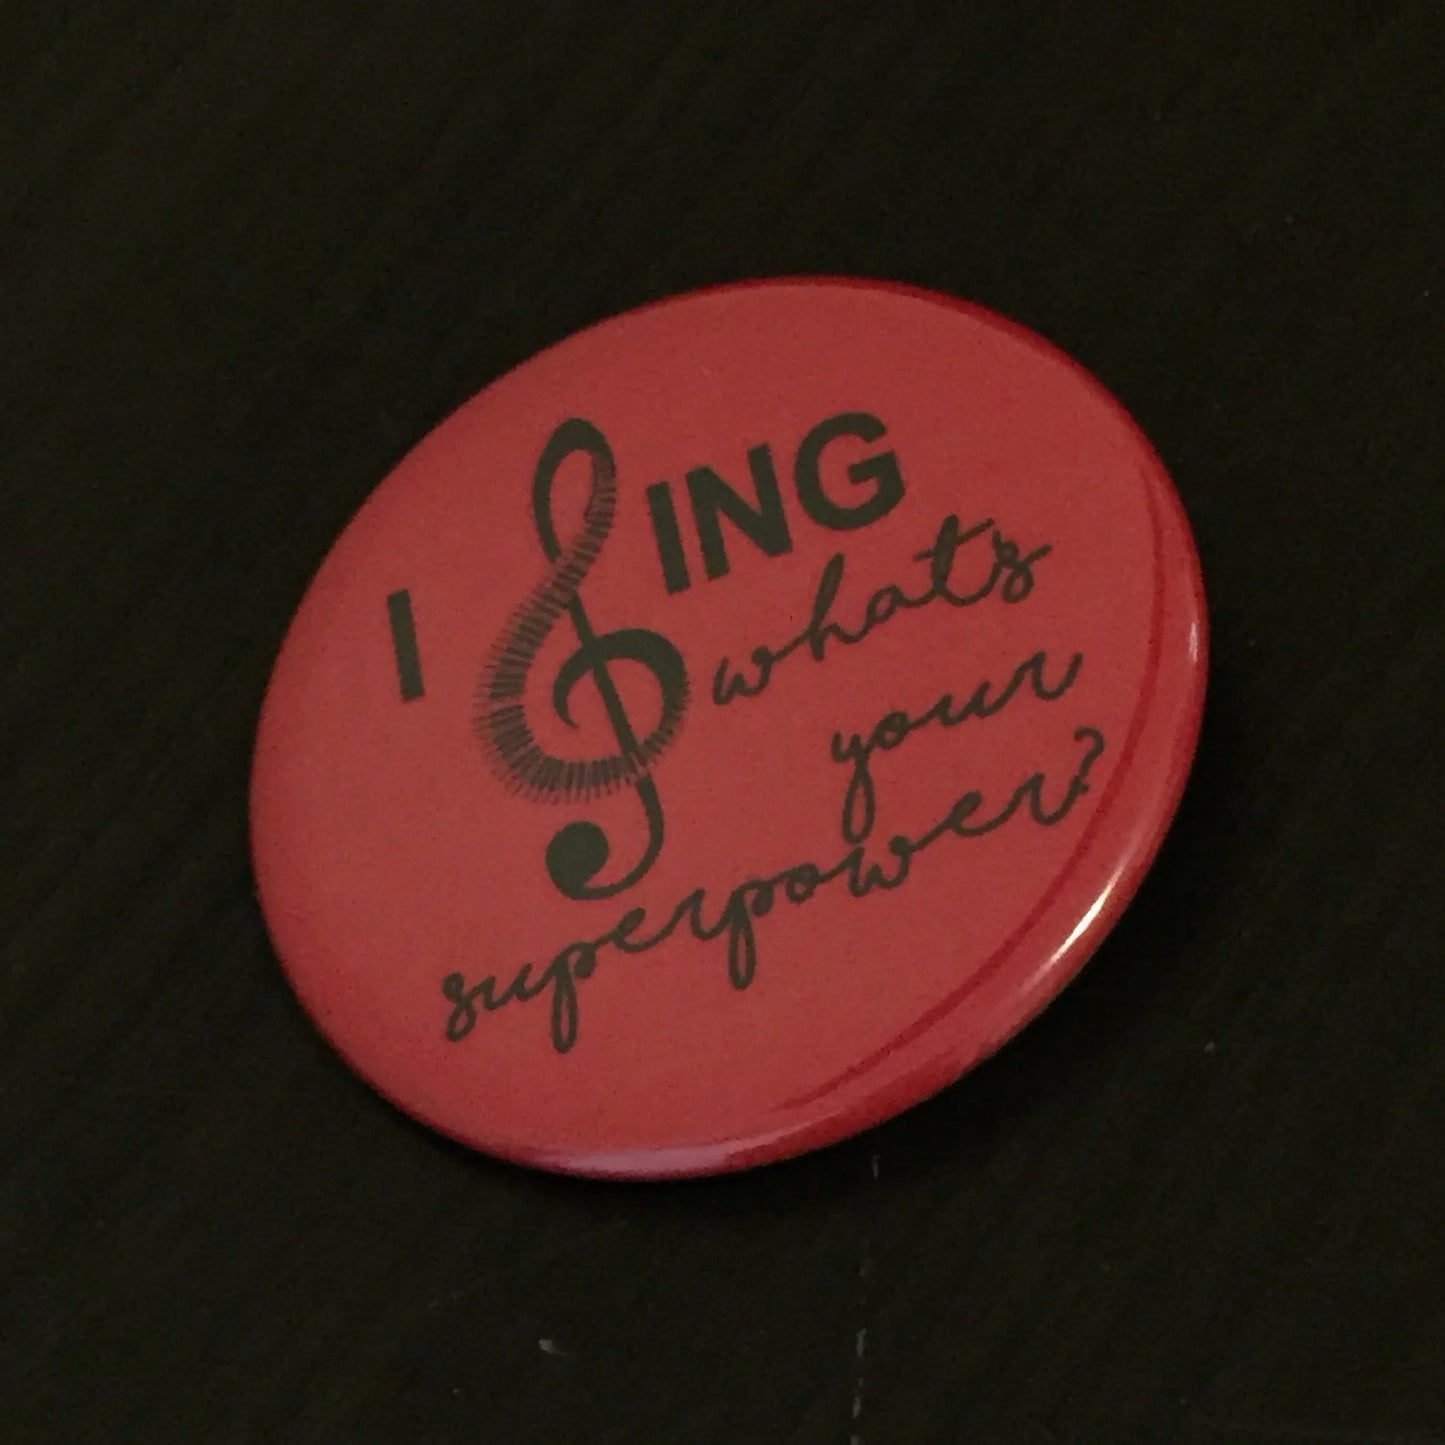 I Sing Button Pin for Music Lover - Gift for Singer -  Musical Theme Favours - Personalized Song Inspired Giveaways 10 pcs